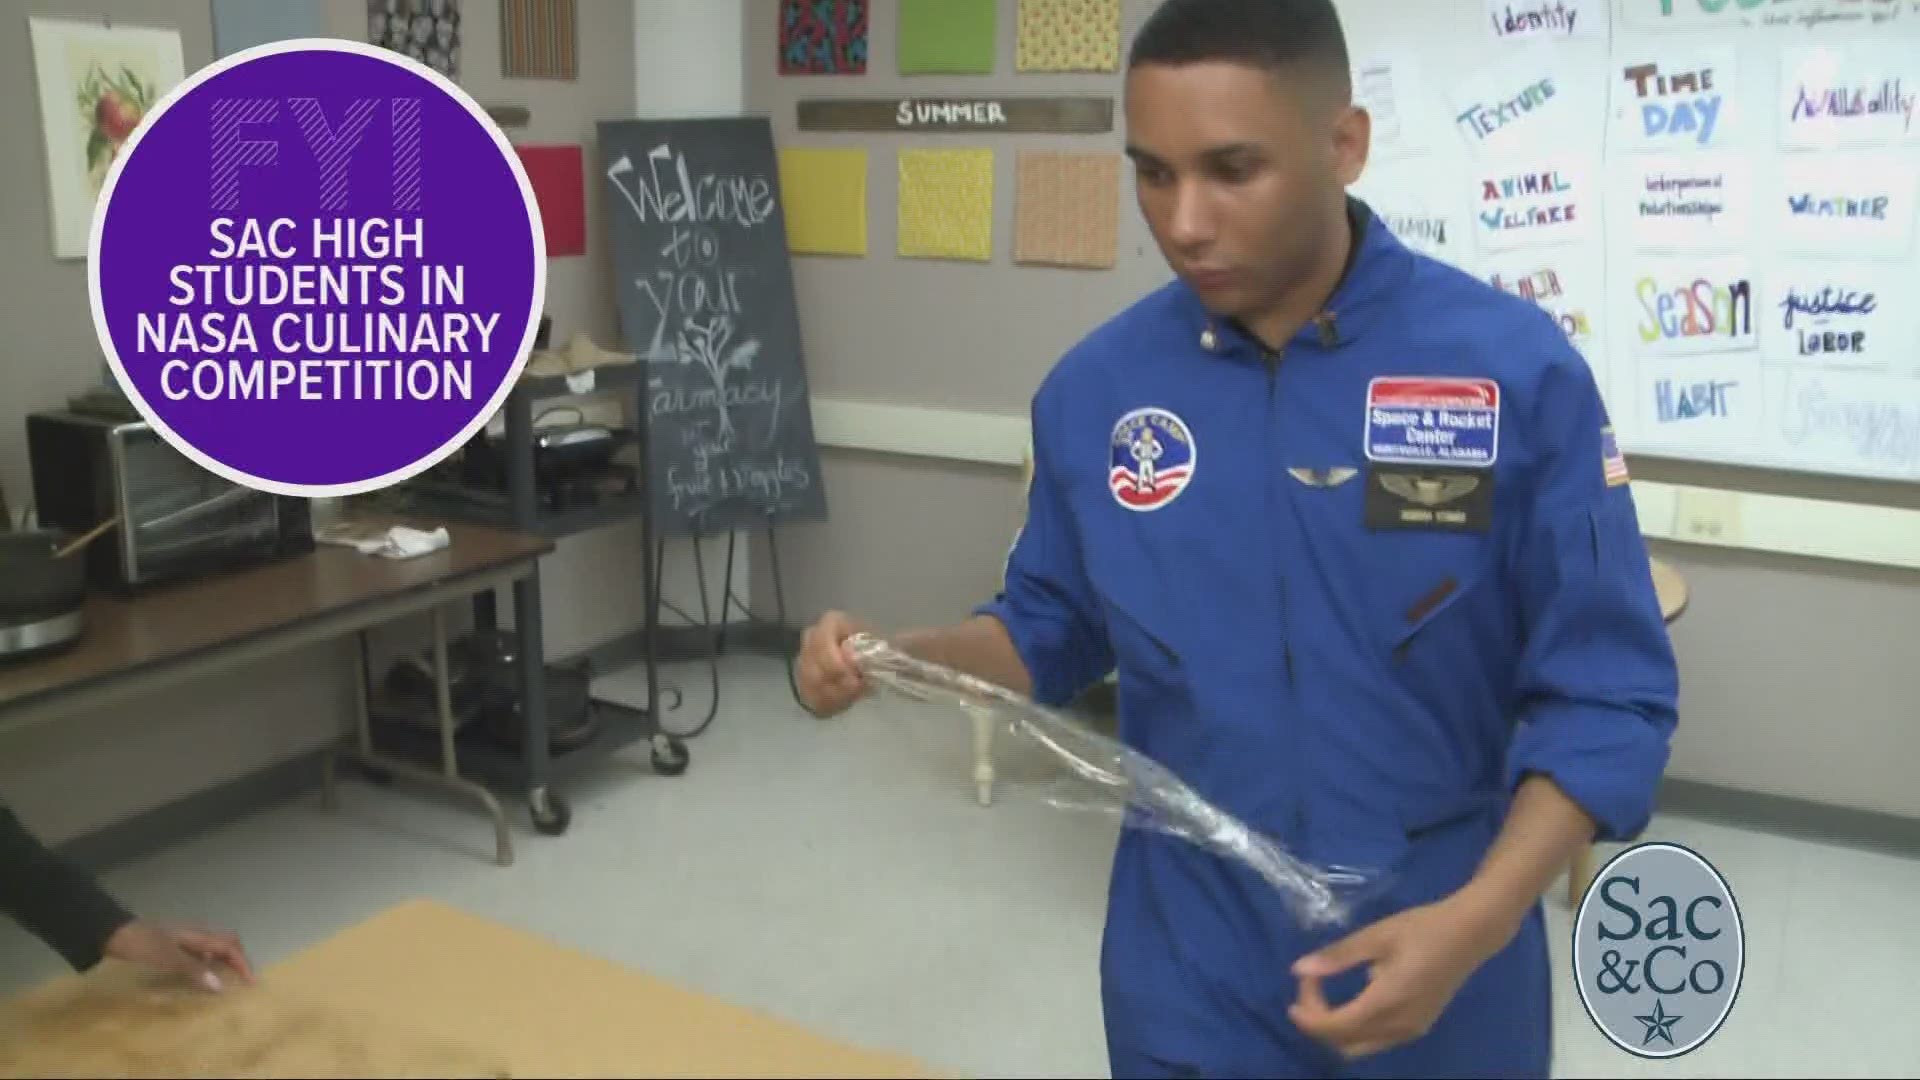 Learn about three local students participating in a NASA Culinary Challenge, and how they need your help to get them to NASA!